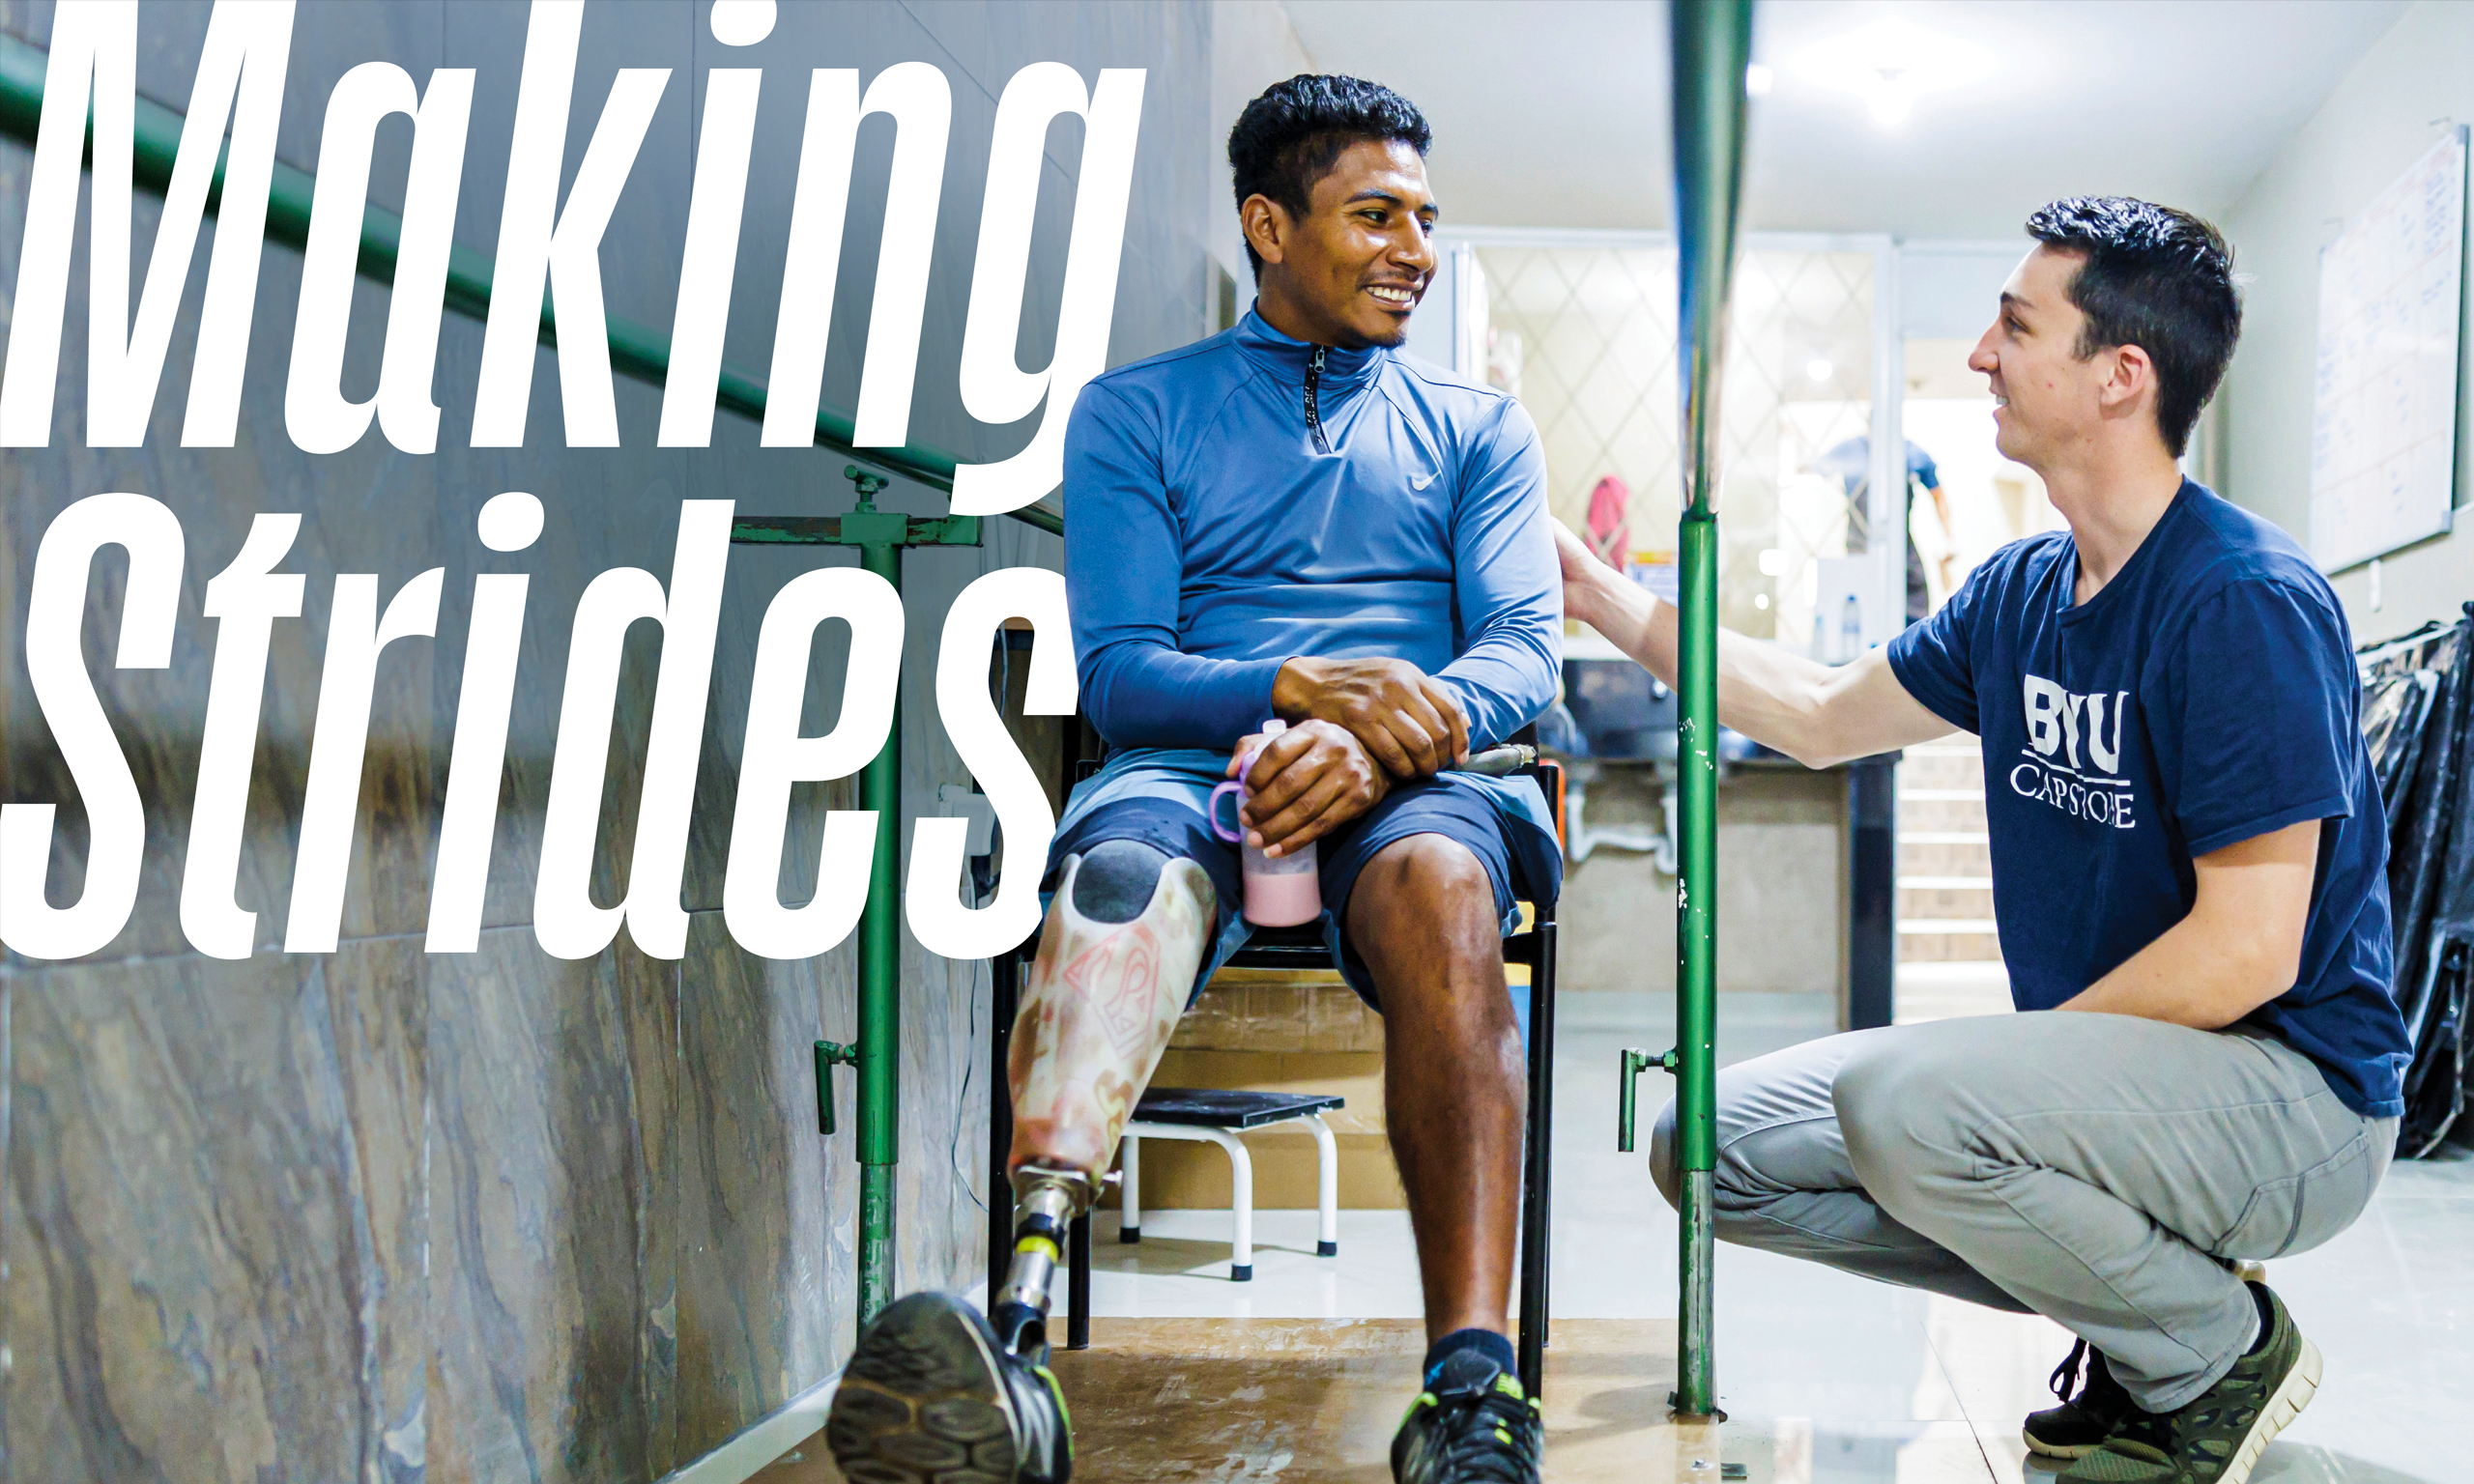 A man with a prosthetic leg sits in a wheelchair while smiling and talking to a BYU student.